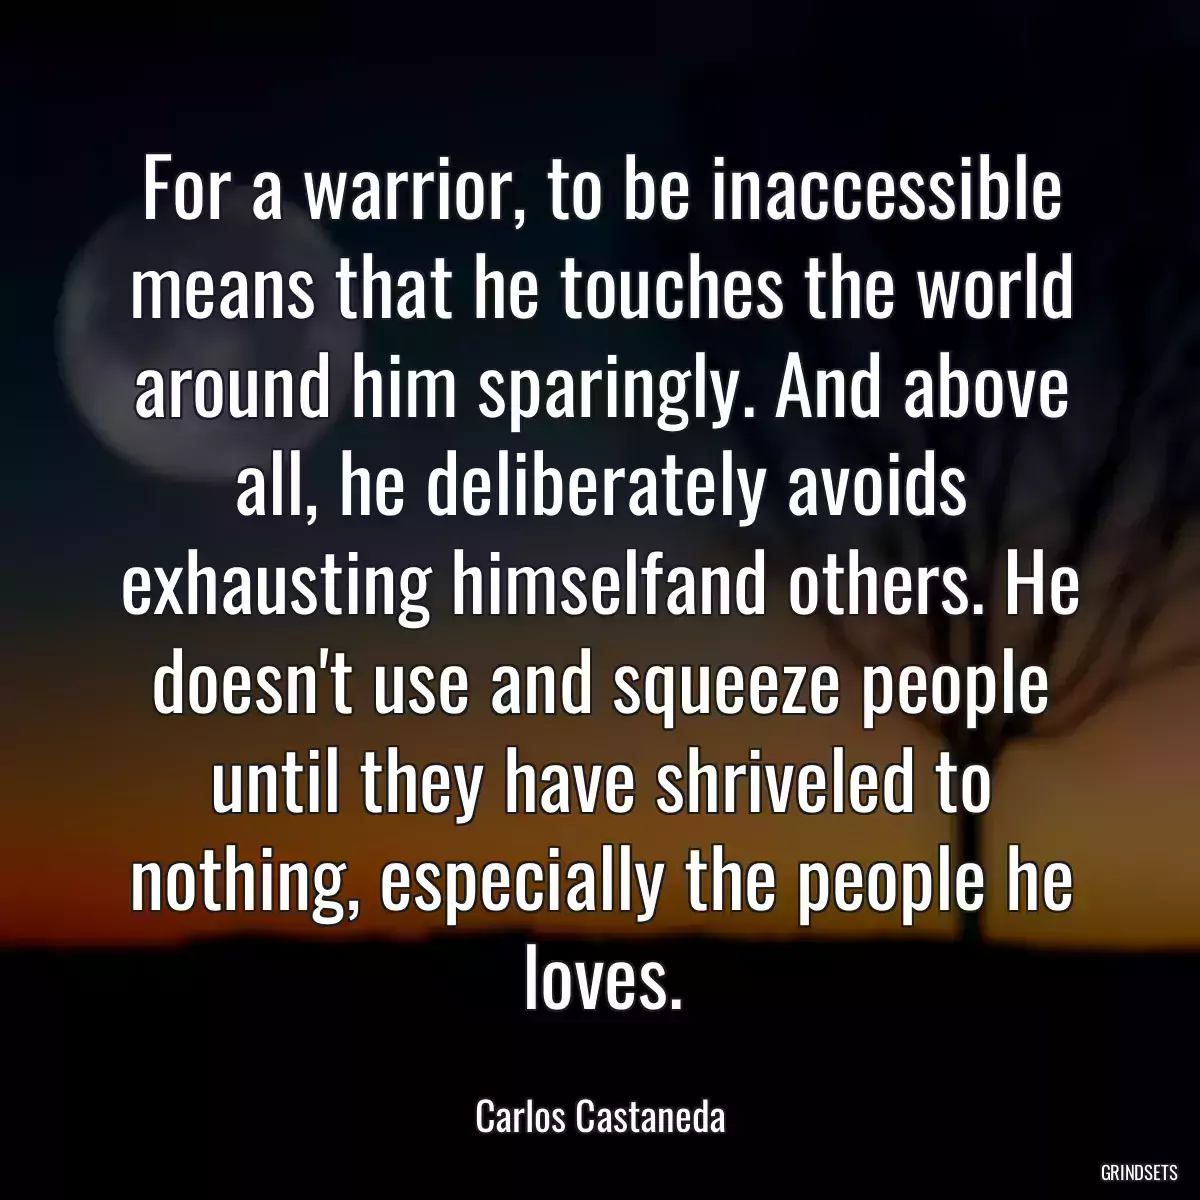 For a warrior, to be inaccessible means that he touches the world around him sparingly. And above all, he deliberately avoids exhausting himselfand others. He doesn\'t use and squeeze people until they have shriveled to nothing, especially the people he loves.